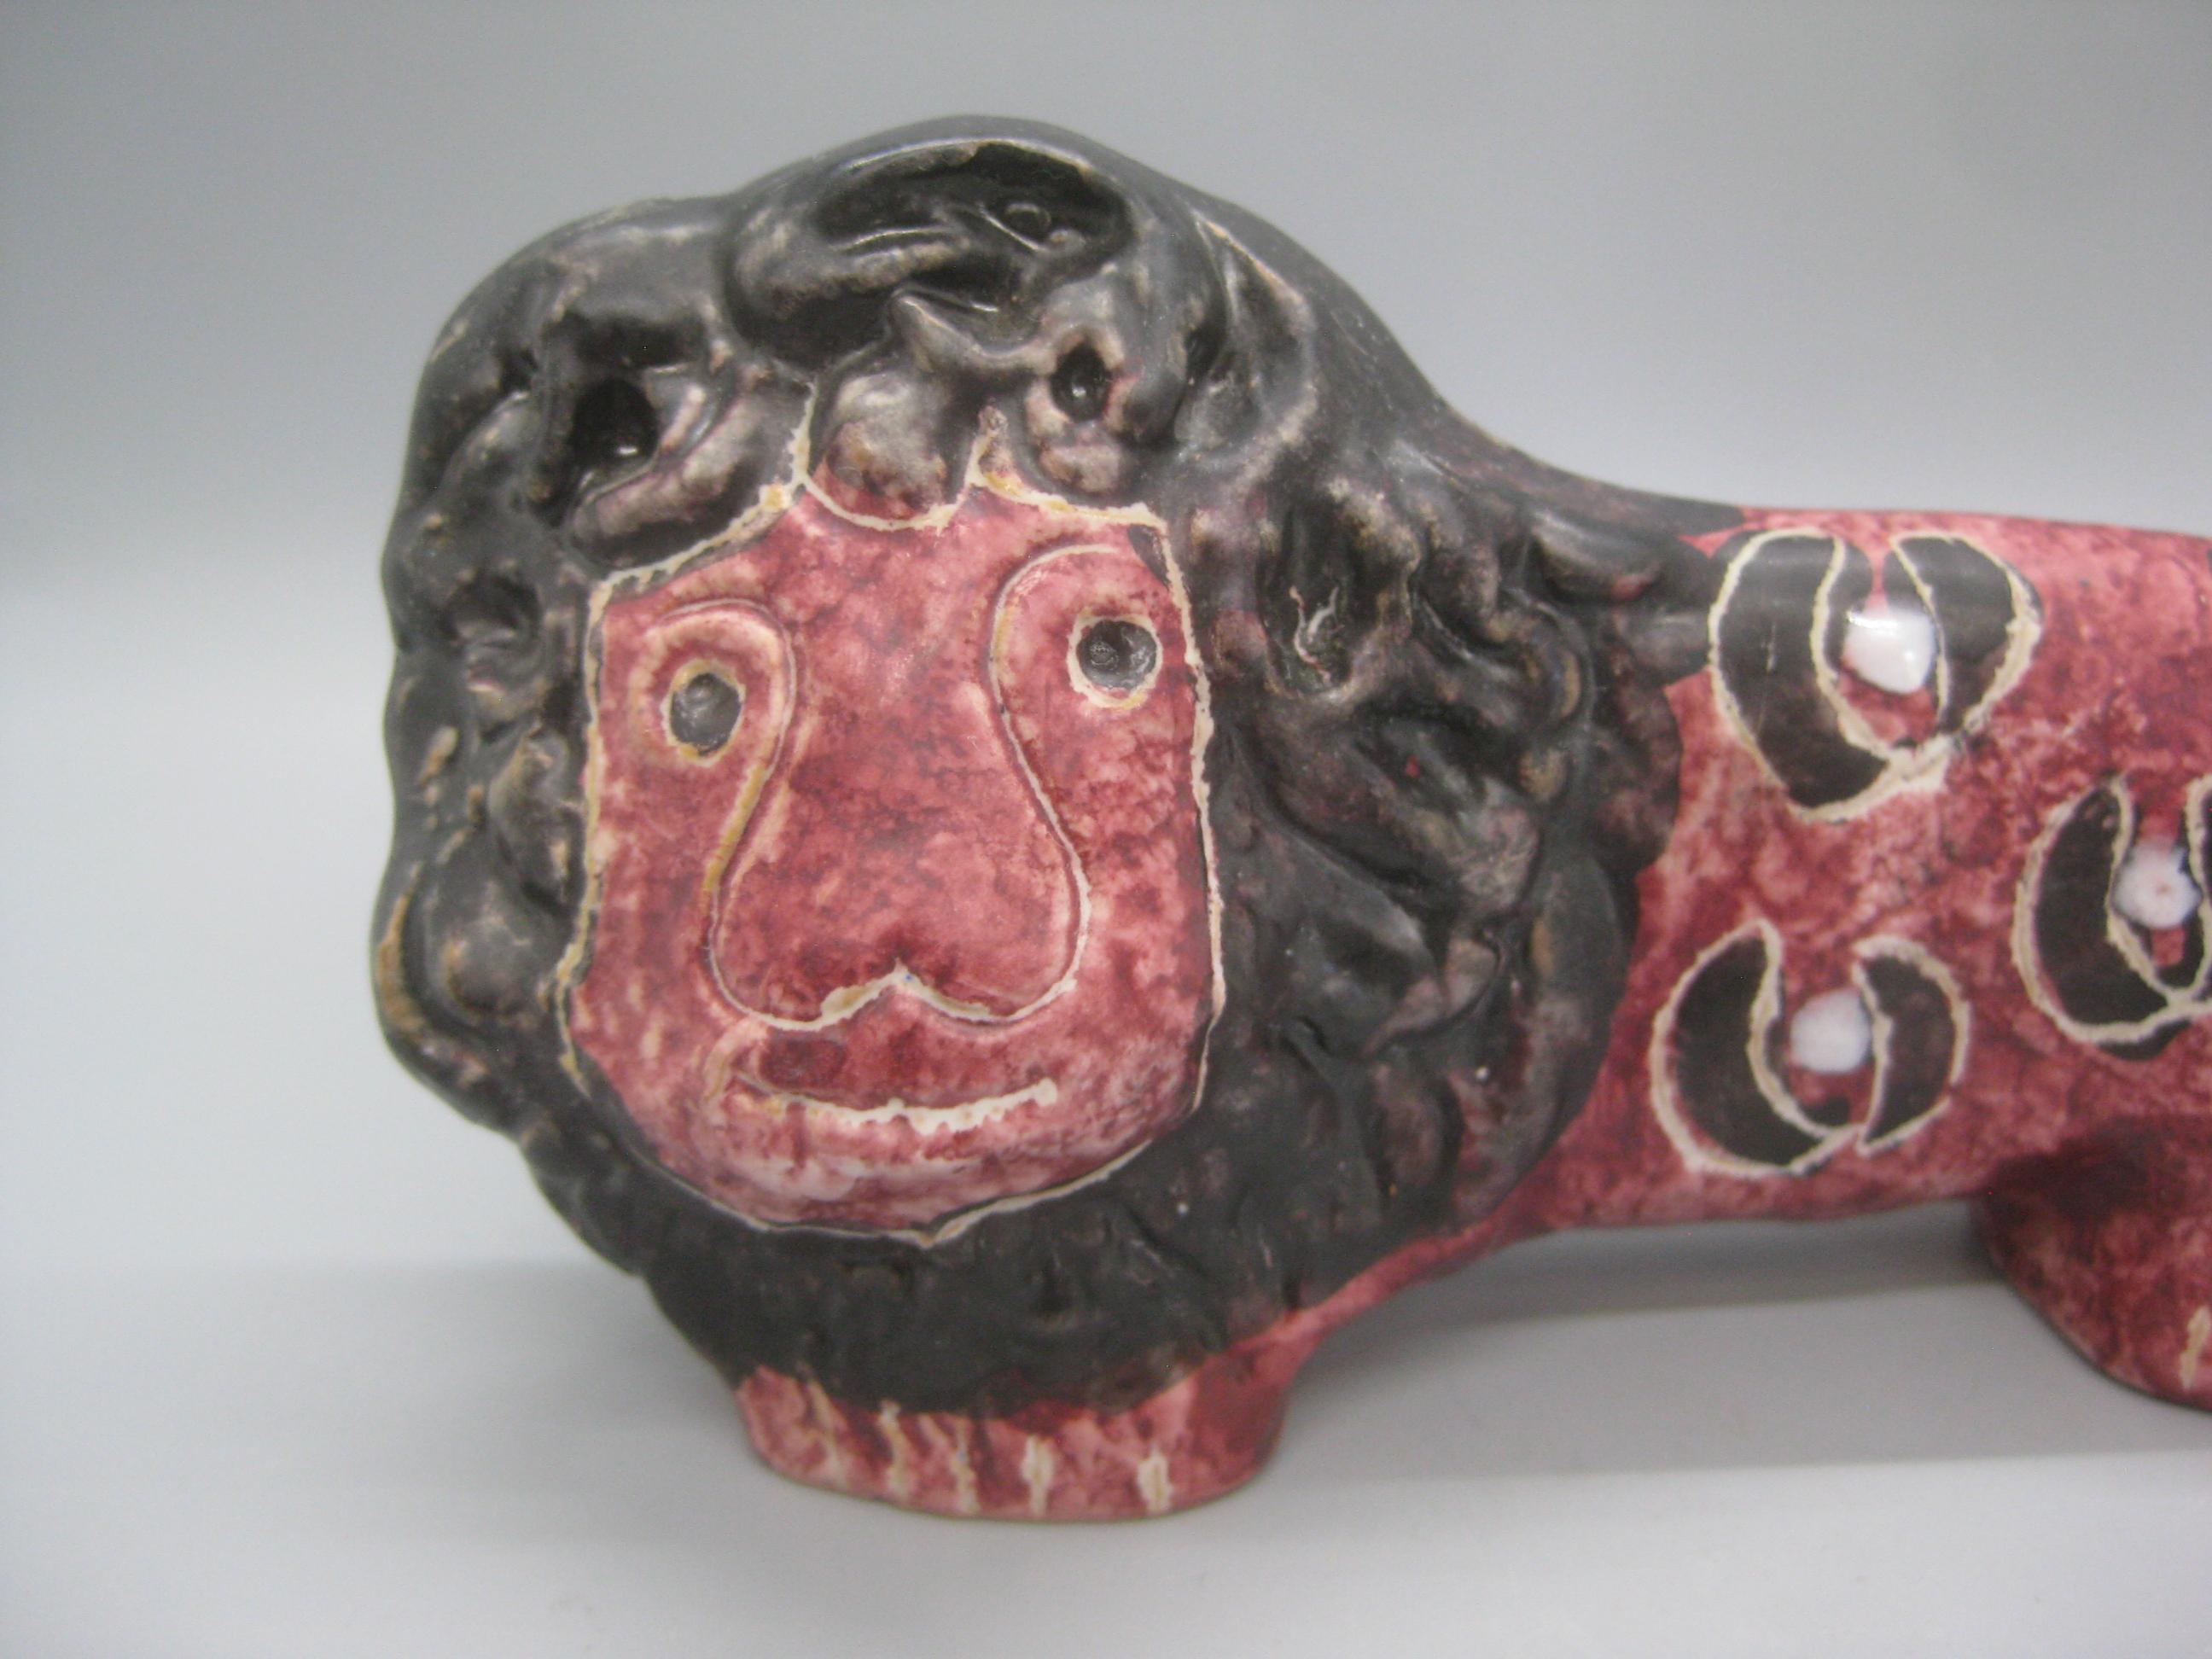 Wonderful Aldo Bitossi Italian art pottery lion figurine sculpture and dates from the 1960's. Marked on the bottom 